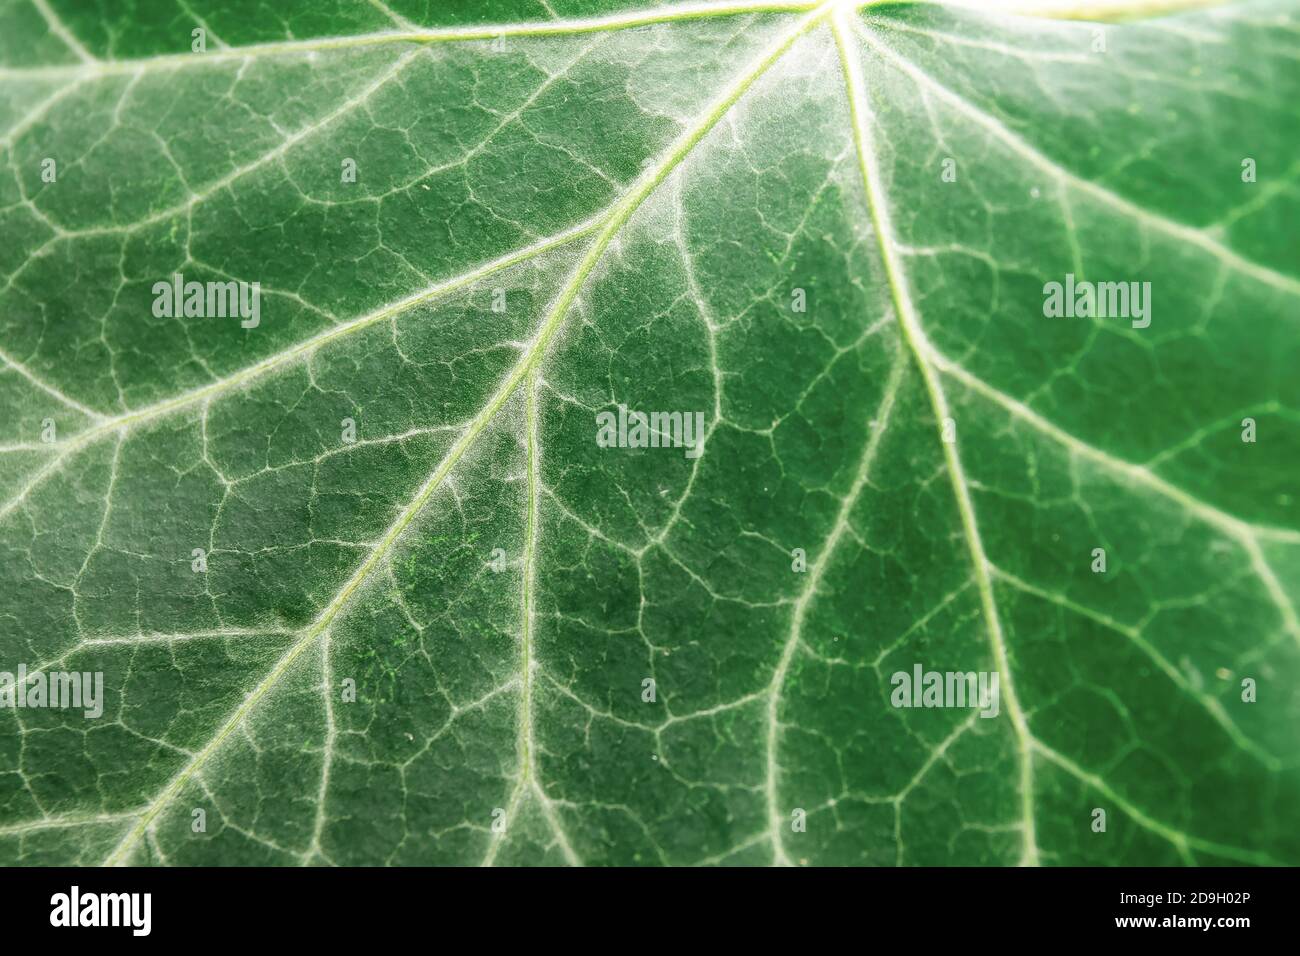 Texture of green ivy leaf, closeup Stock Photo